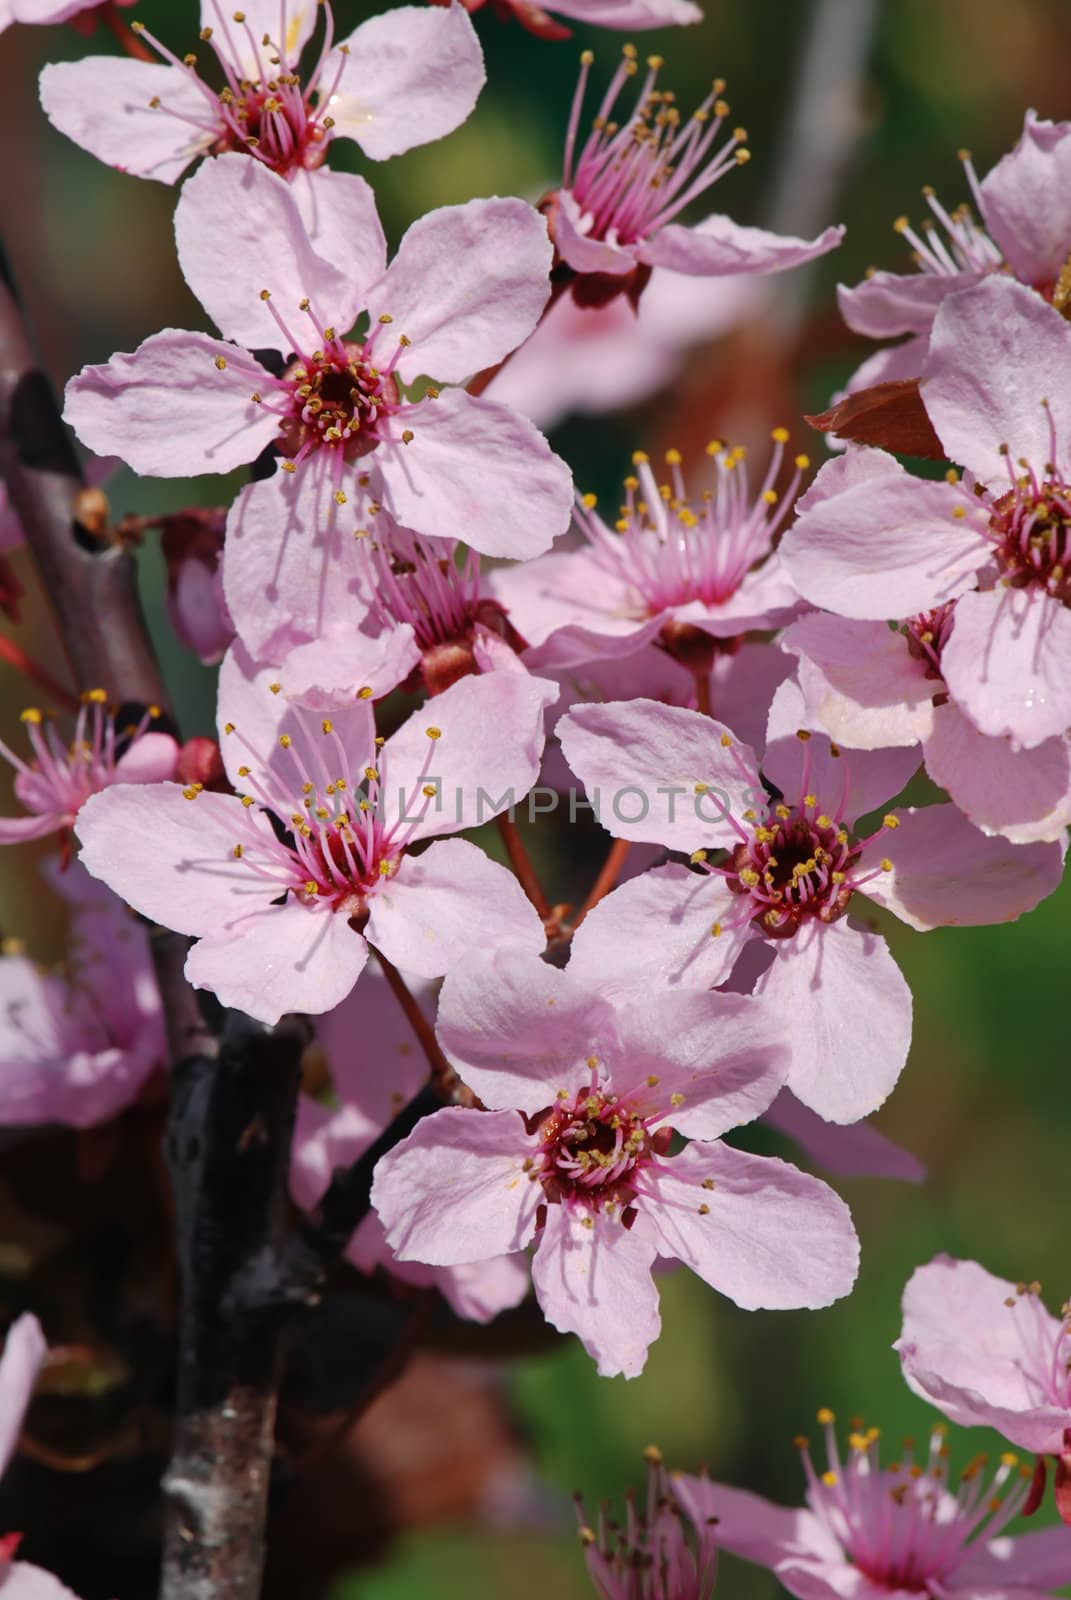 Spring bloom of a wild apple tree with a blurred background